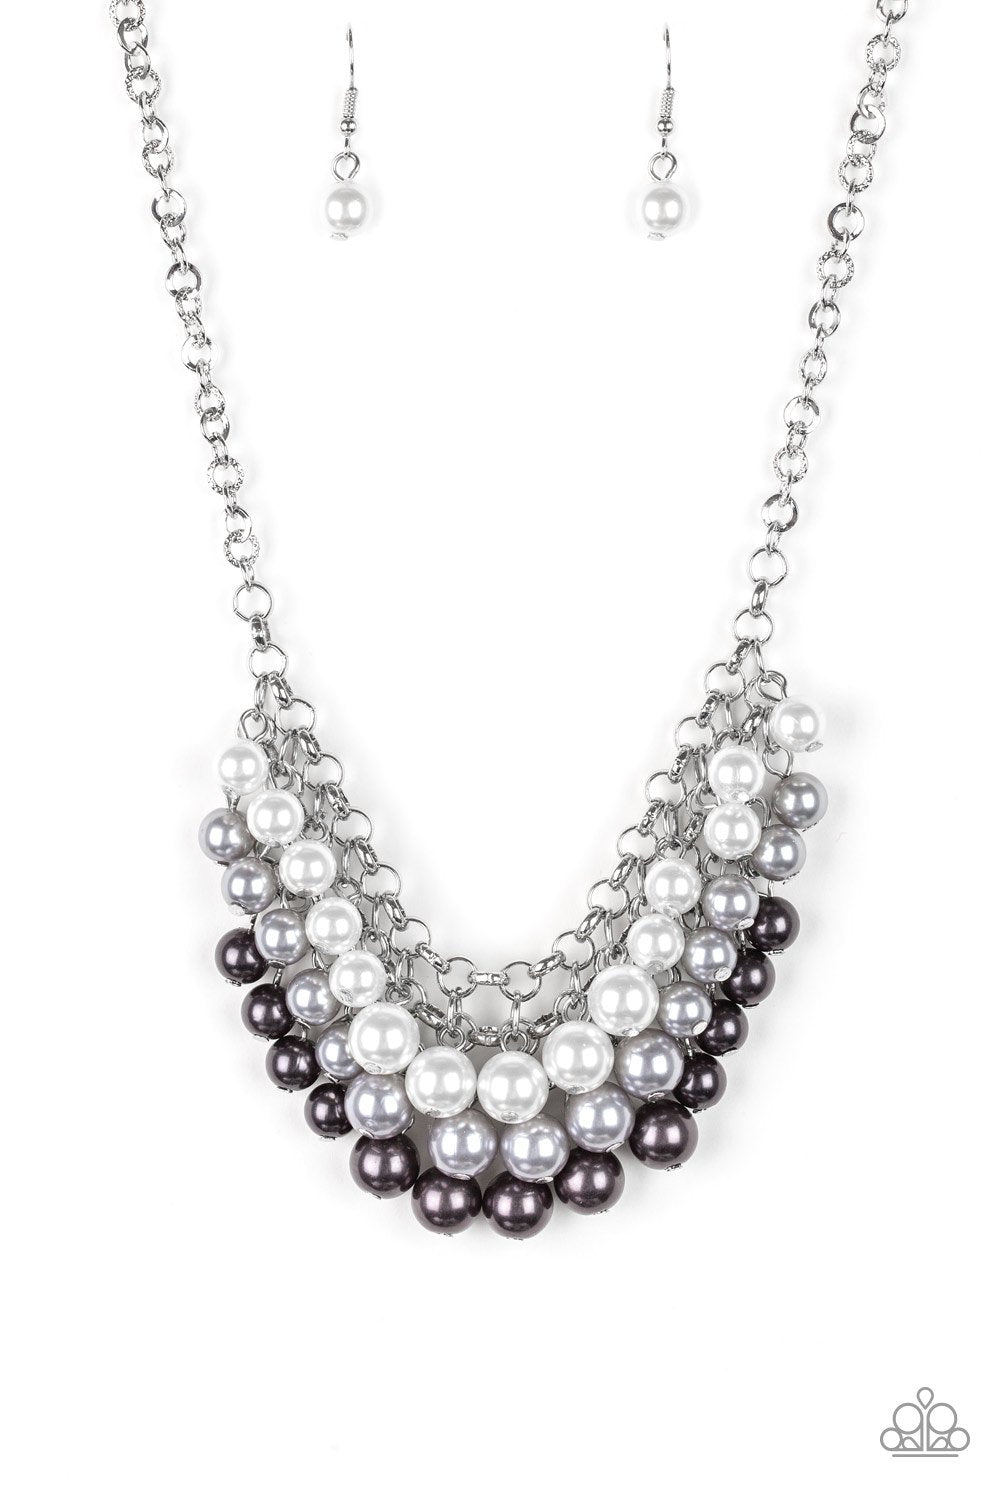 Paparazzi Necklace ~ Run For The HEELS! - Multi